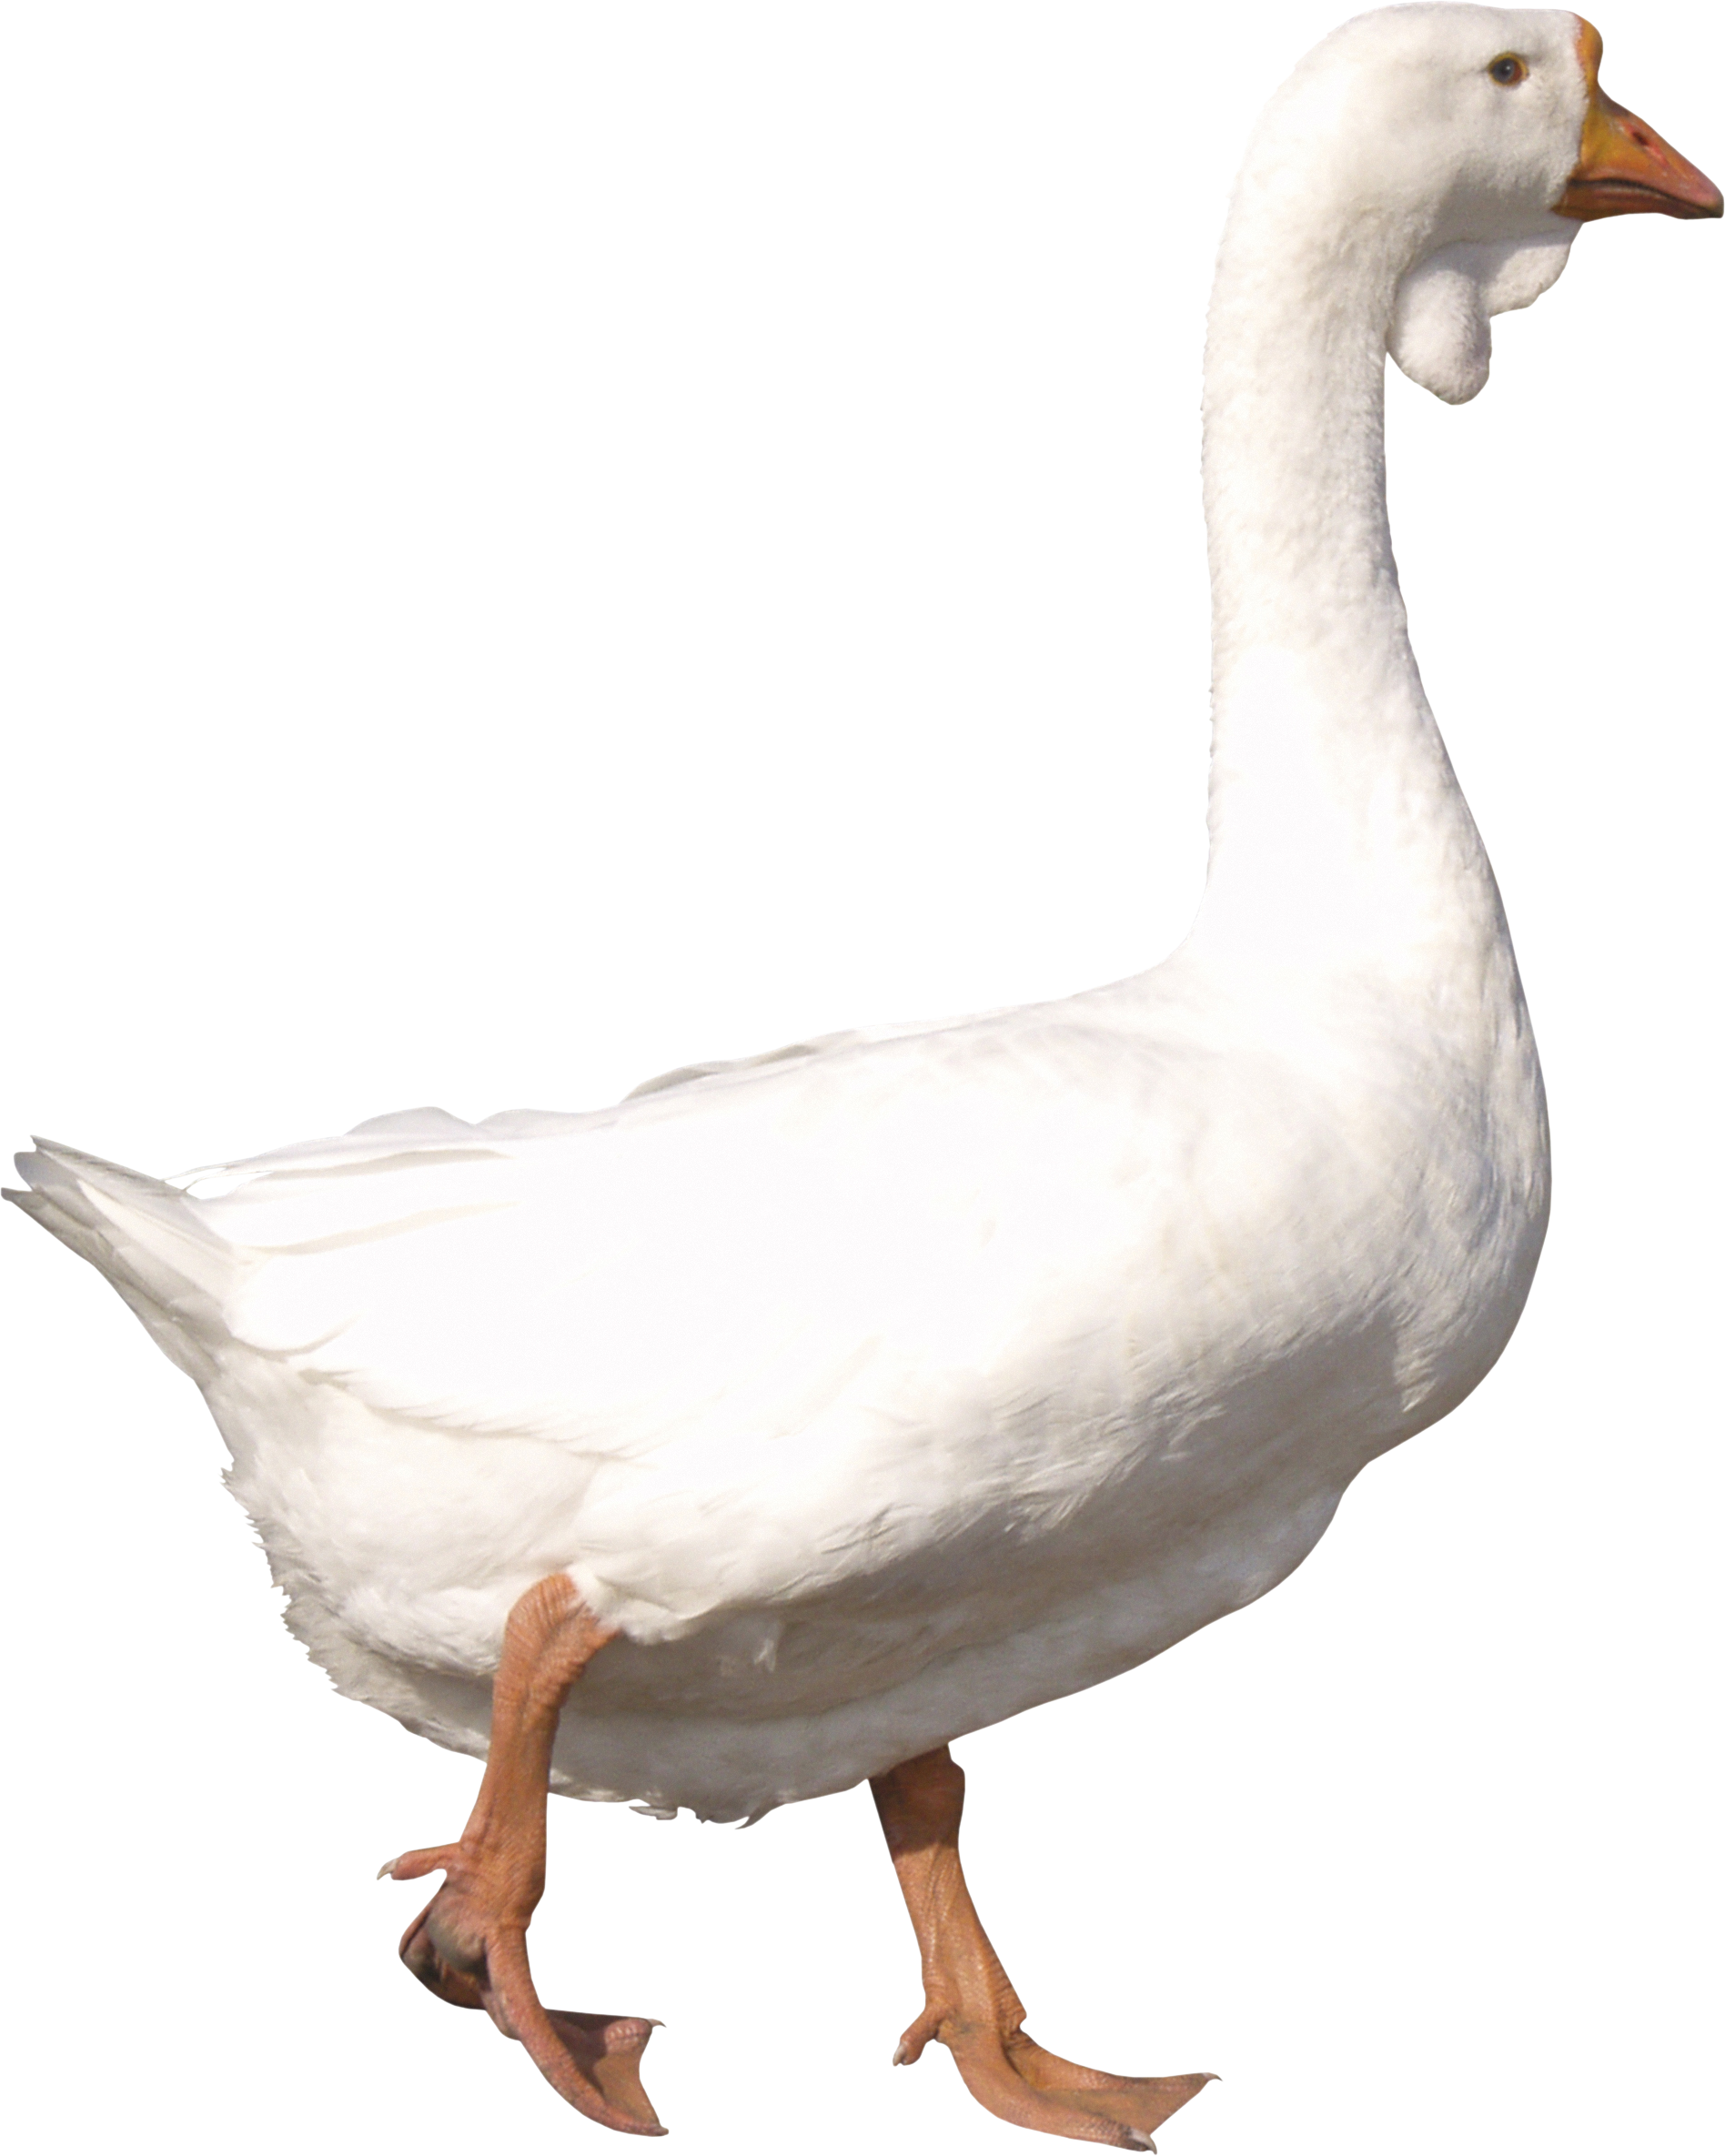 White Goose Png - Goose, Transparent background PNG HD thumbnail